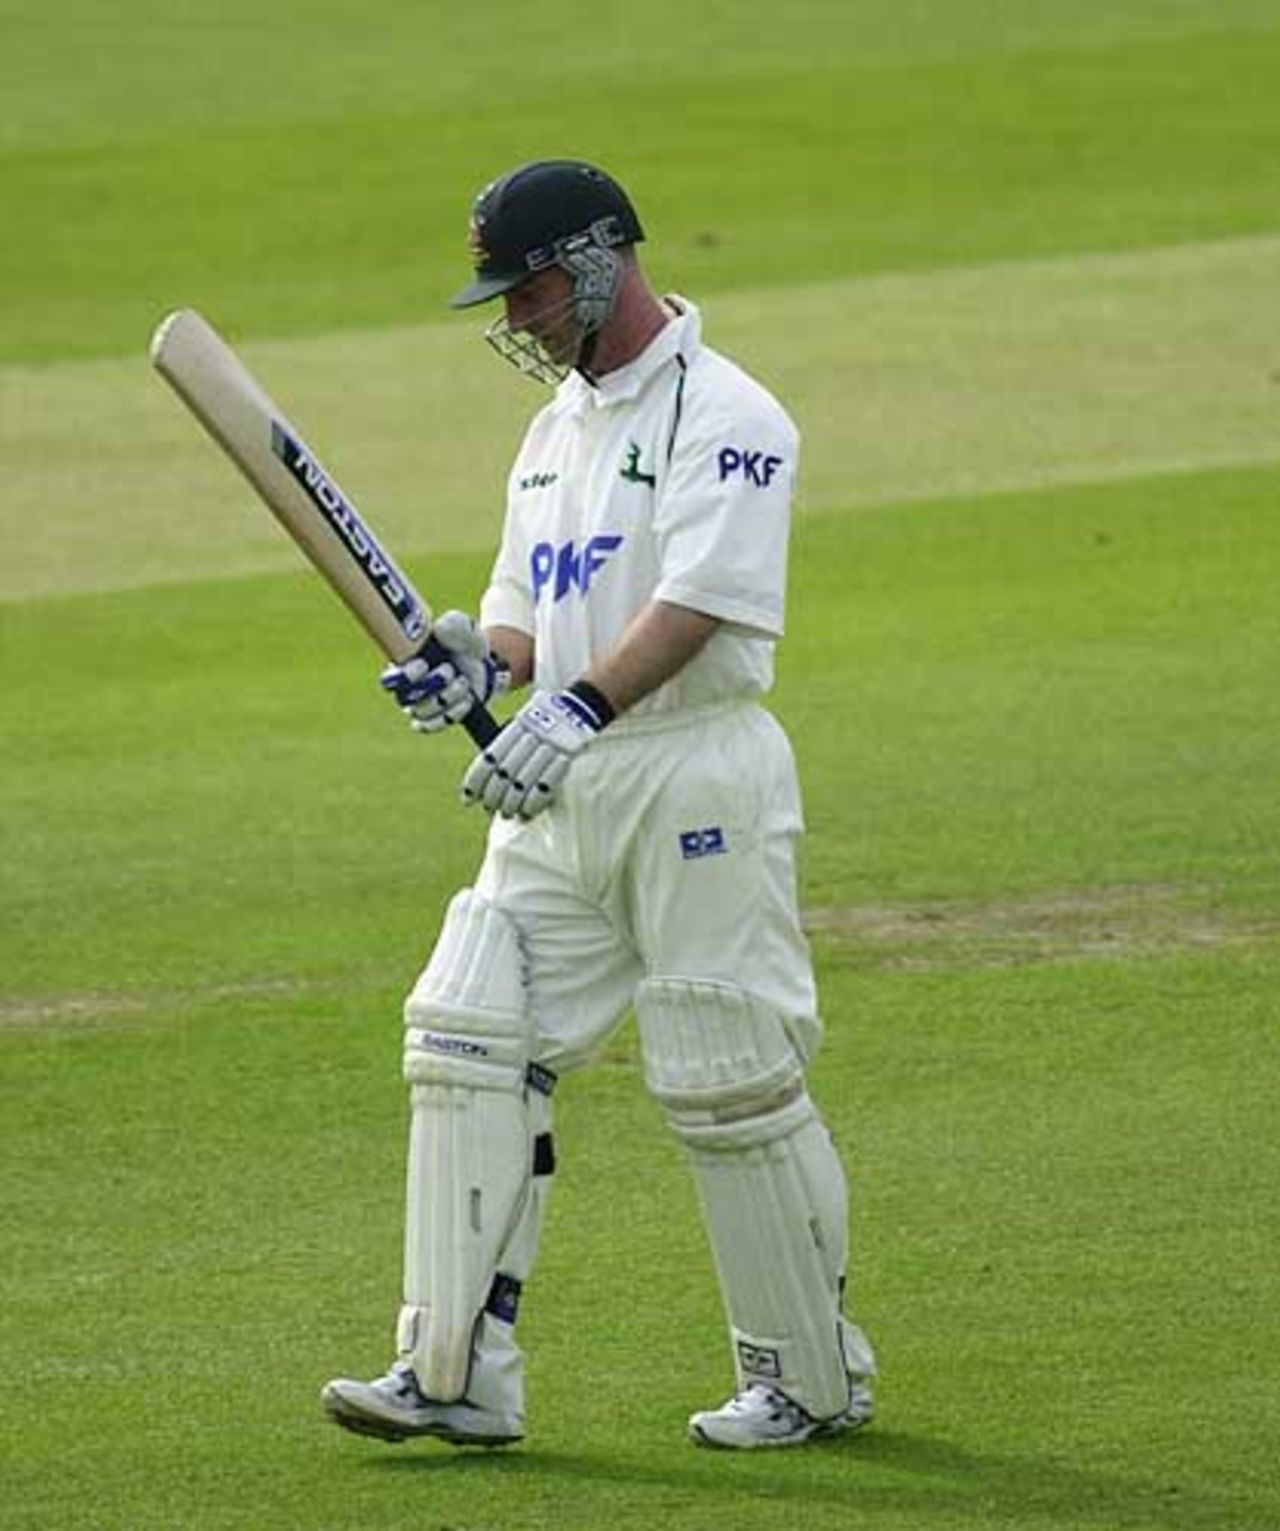 Notts Paul Johnson trudges off after being given out lbw to Greenidge, Frizzell County Championship, Trent Bridge, 25 May 2002